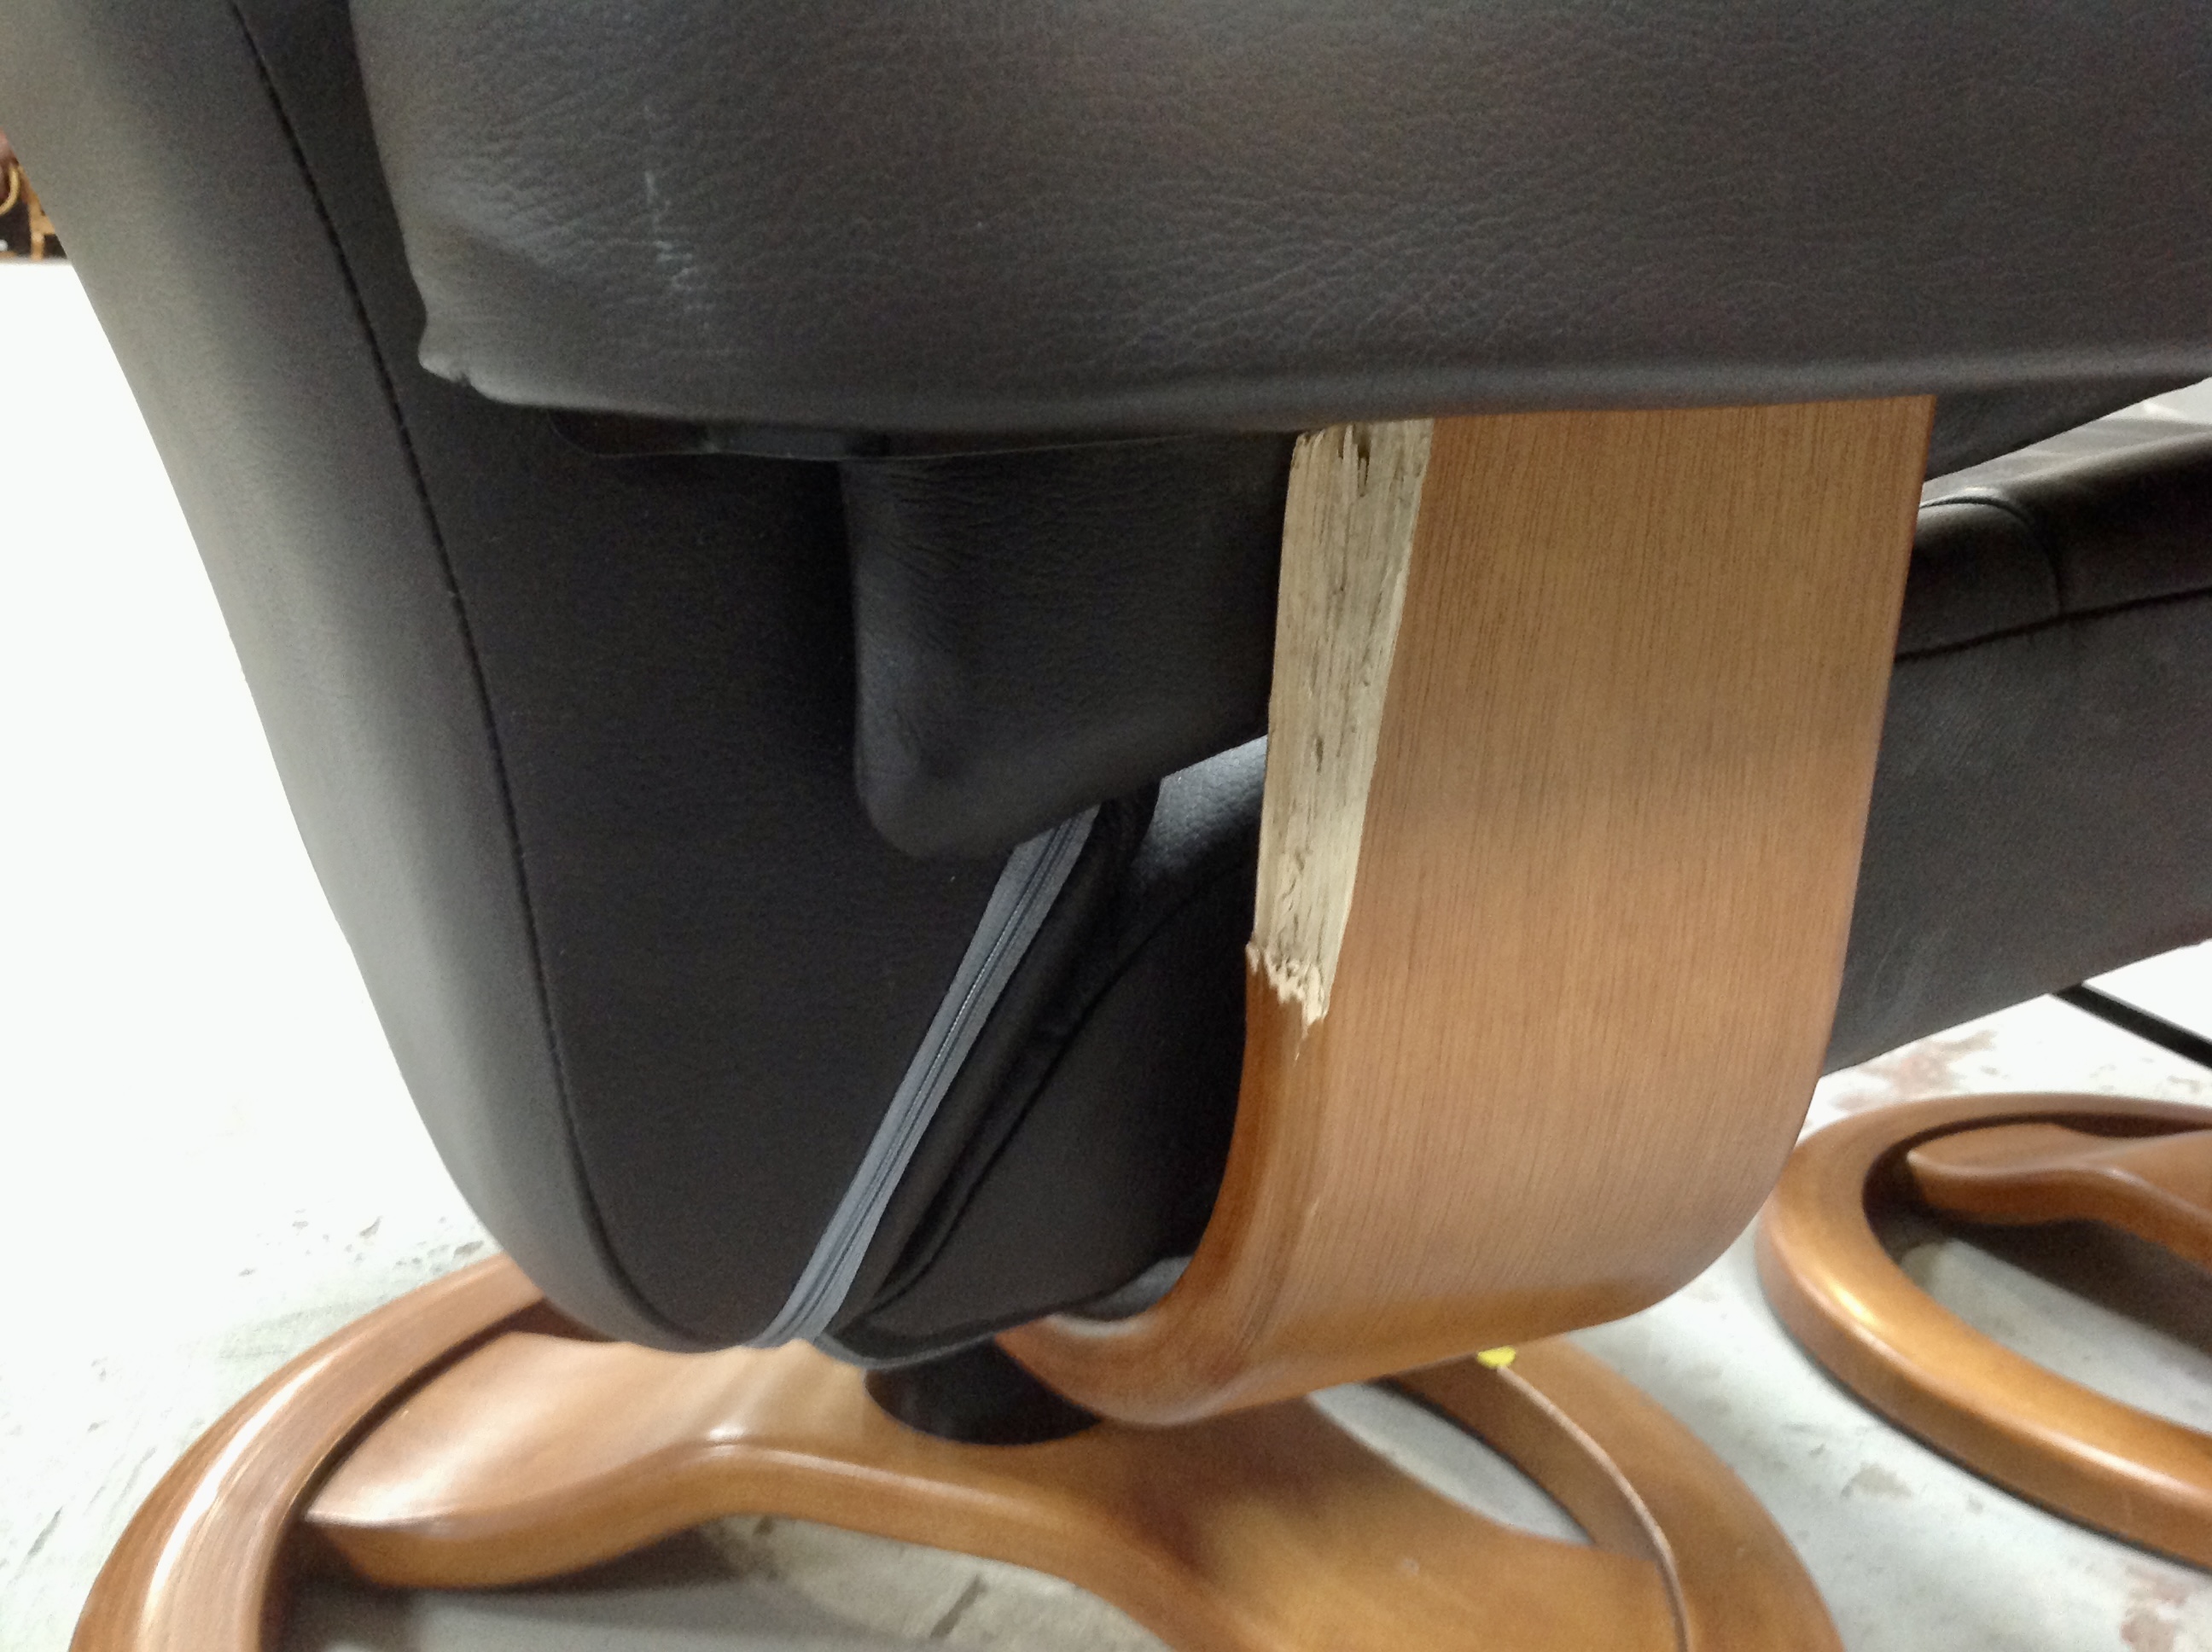 A brown leather reclining lounger chair with stool (arm damaged) - Image 2 of 2